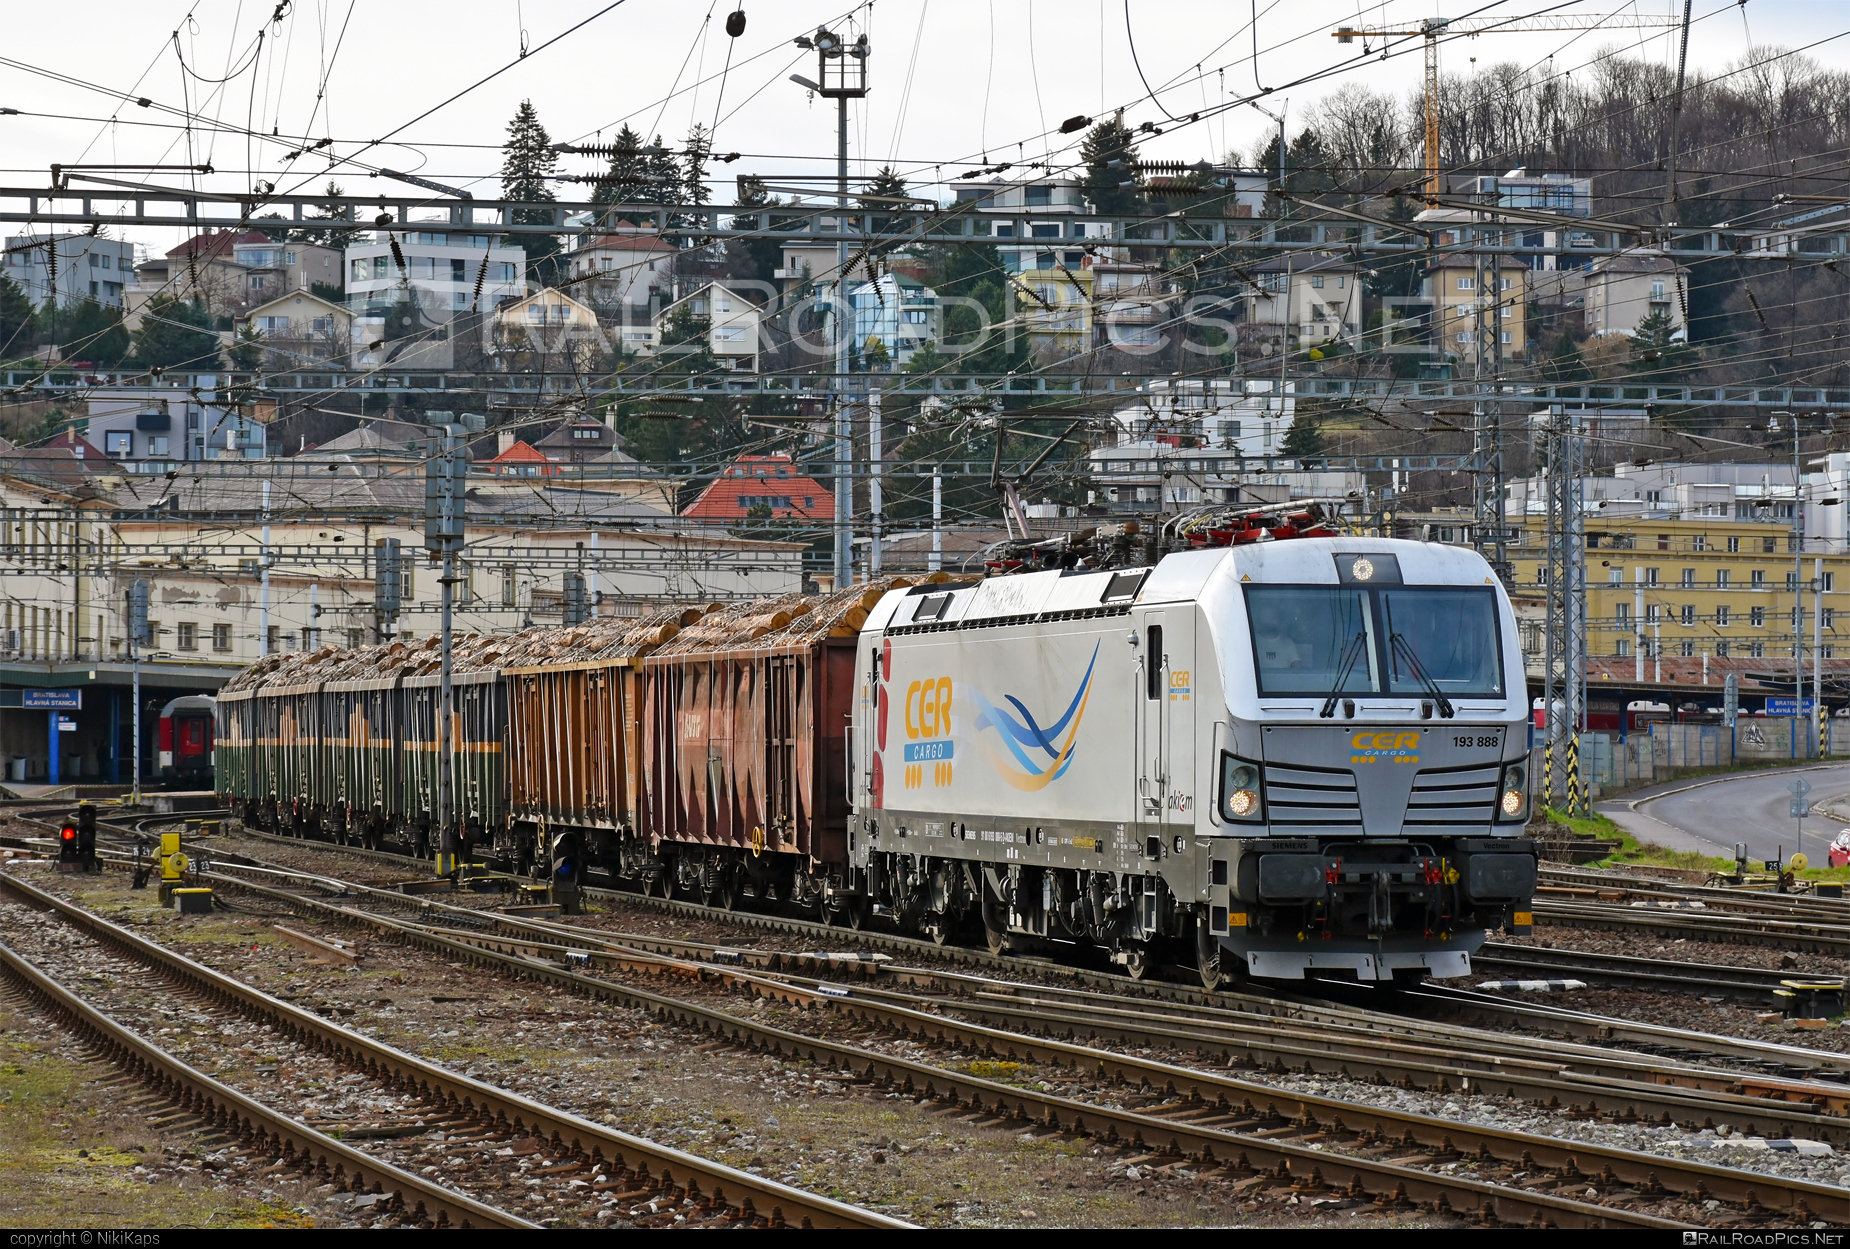 Siemens Vectron MS - 193 888 operated by CER Cargo Holding SE #akiem #akiemsas #cer #cercargoholding #cercargoholdingse #openwagon #siemens #siemensVectron #siemensVectronMS #vectron #vectronMS #wood